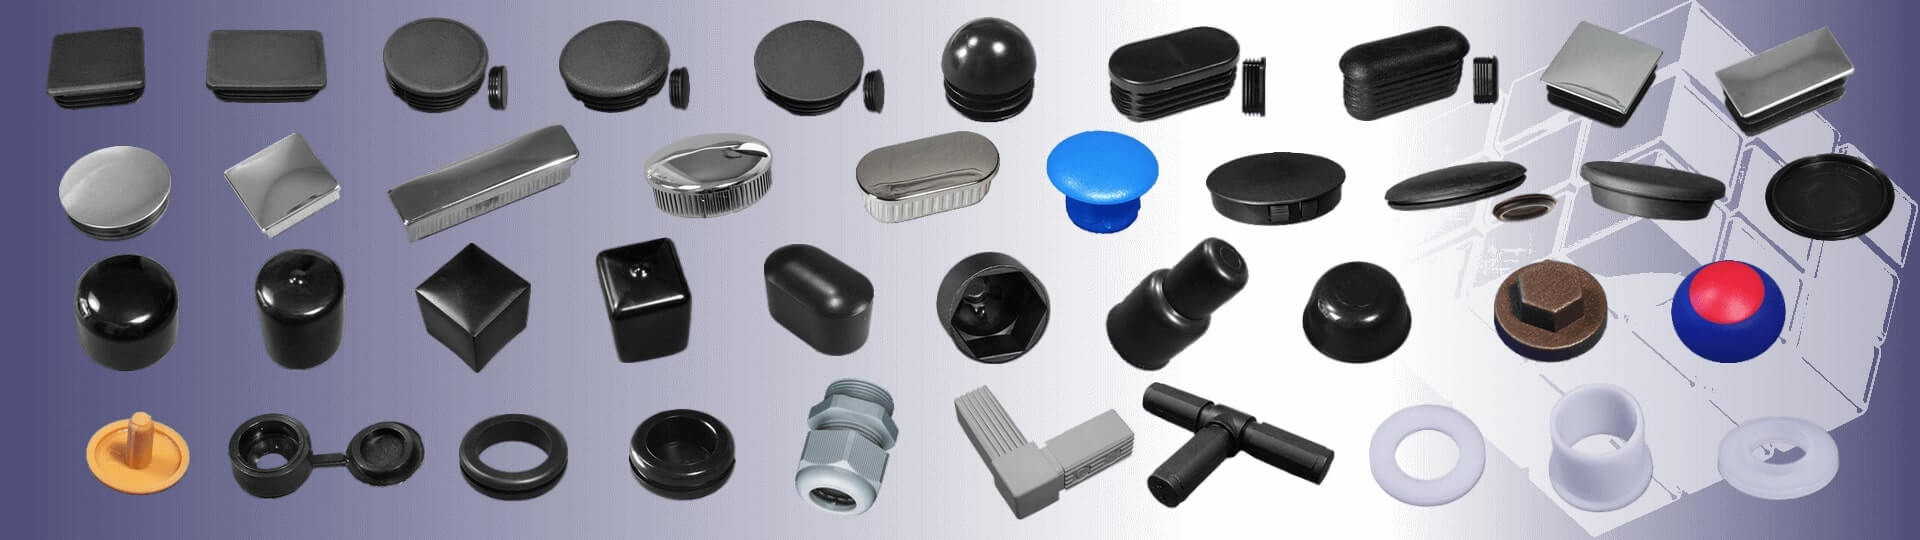 for tubes, blanking, end caps, bolts, nuts; screws, grommets.